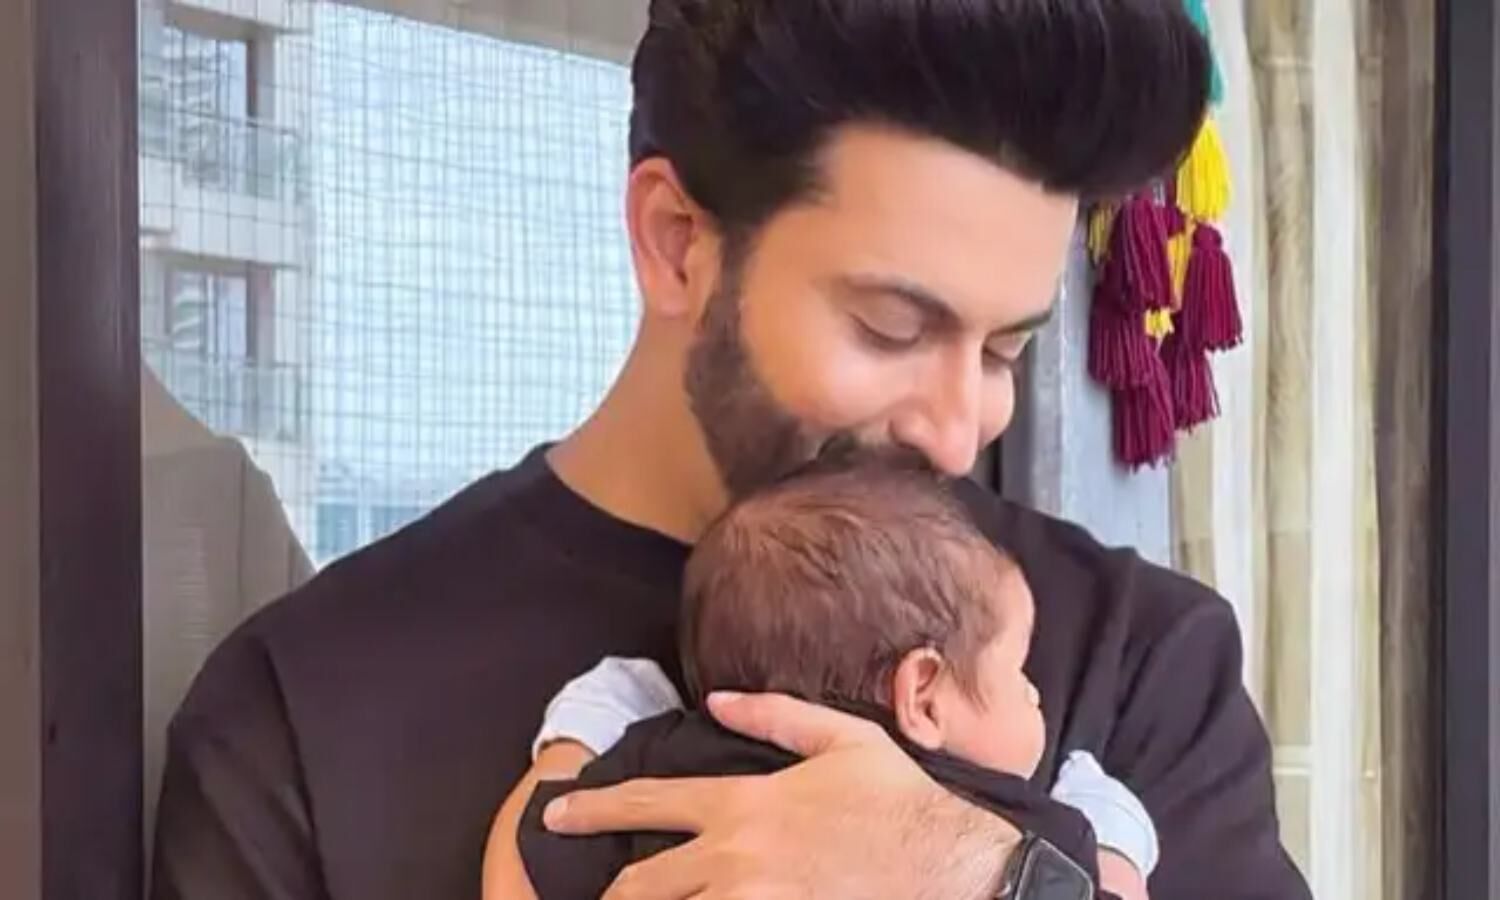 Jhalak Dikhhla Jaa10: Contestant Dheeraj Dhuper shares cute pictures of his baby boy